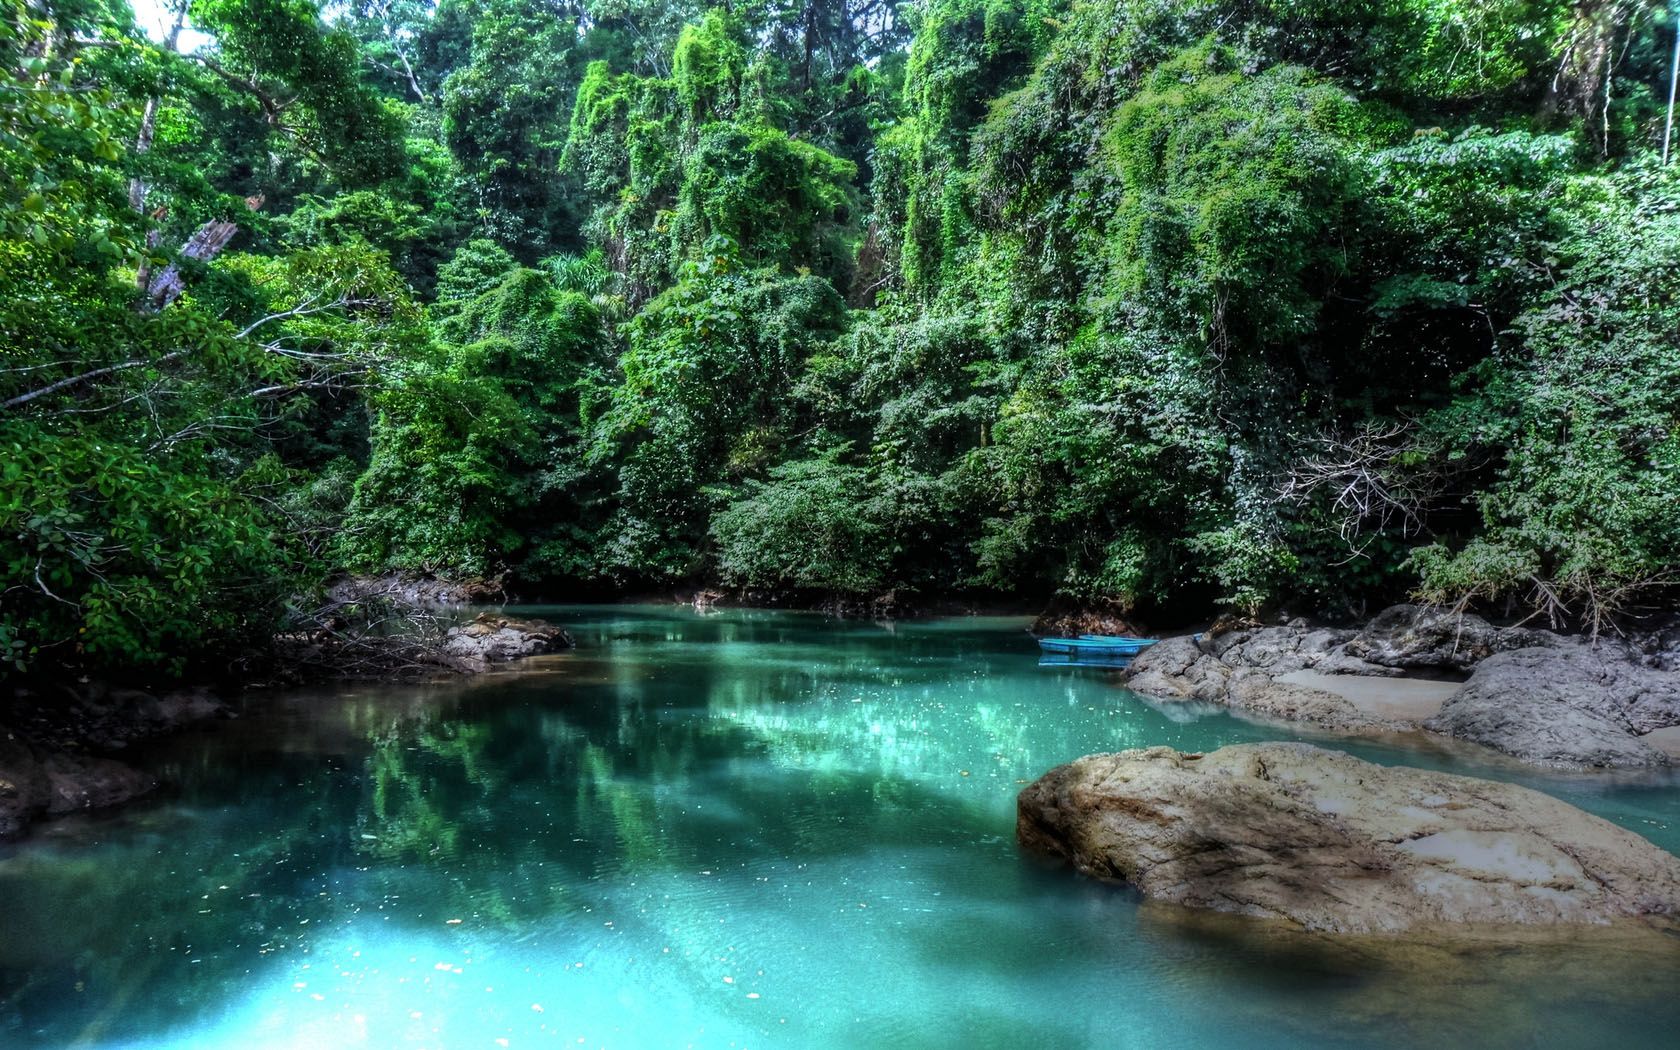 costa rica wallpaper,water resources,body of water,natural landscape,nature,nature reserve